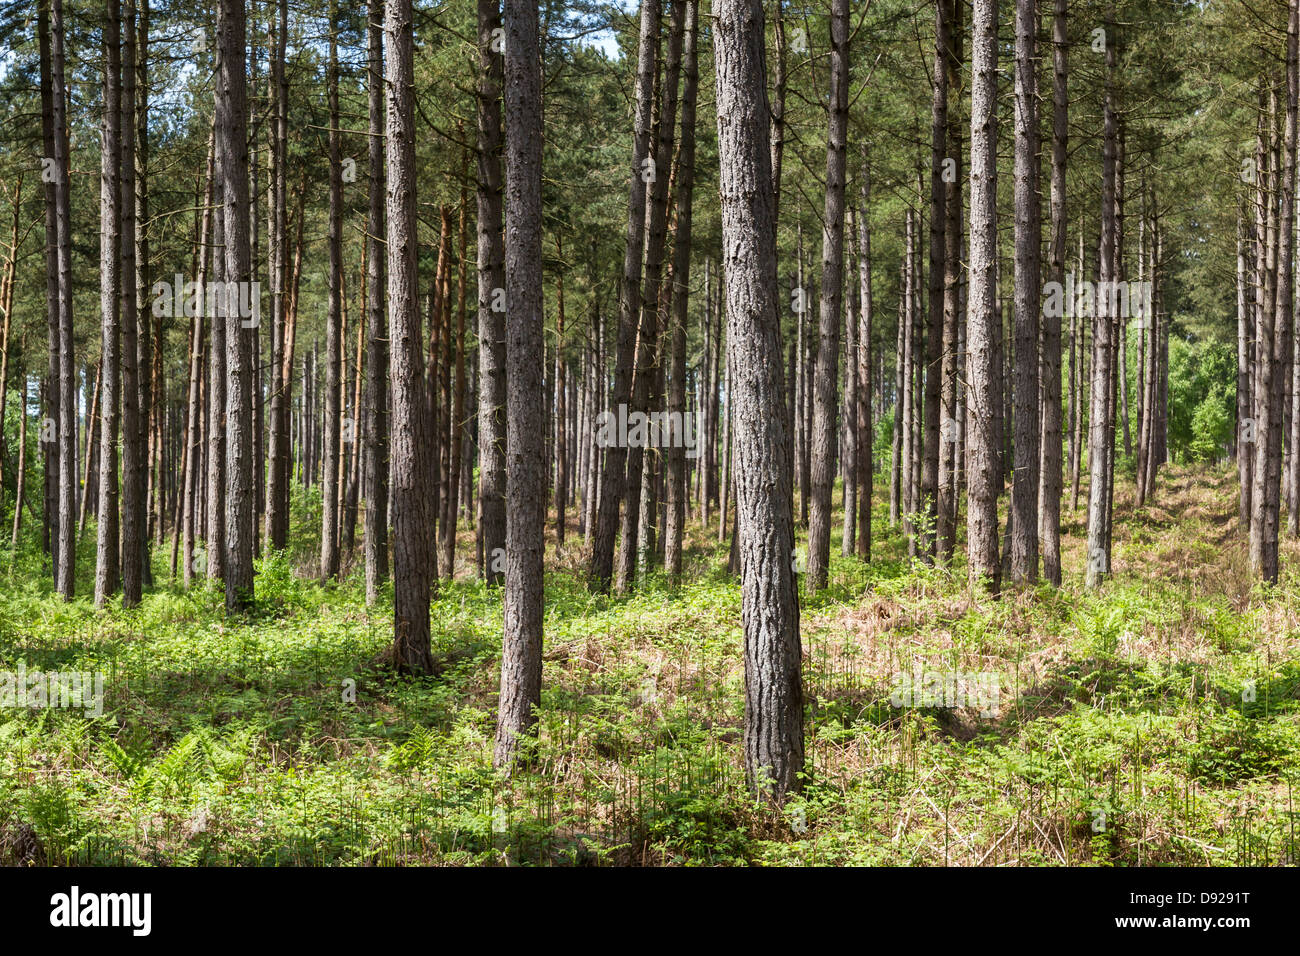 Tall Pine Trees / Fir Trees / Larch trees in monoculture forest plantation Stock Photo